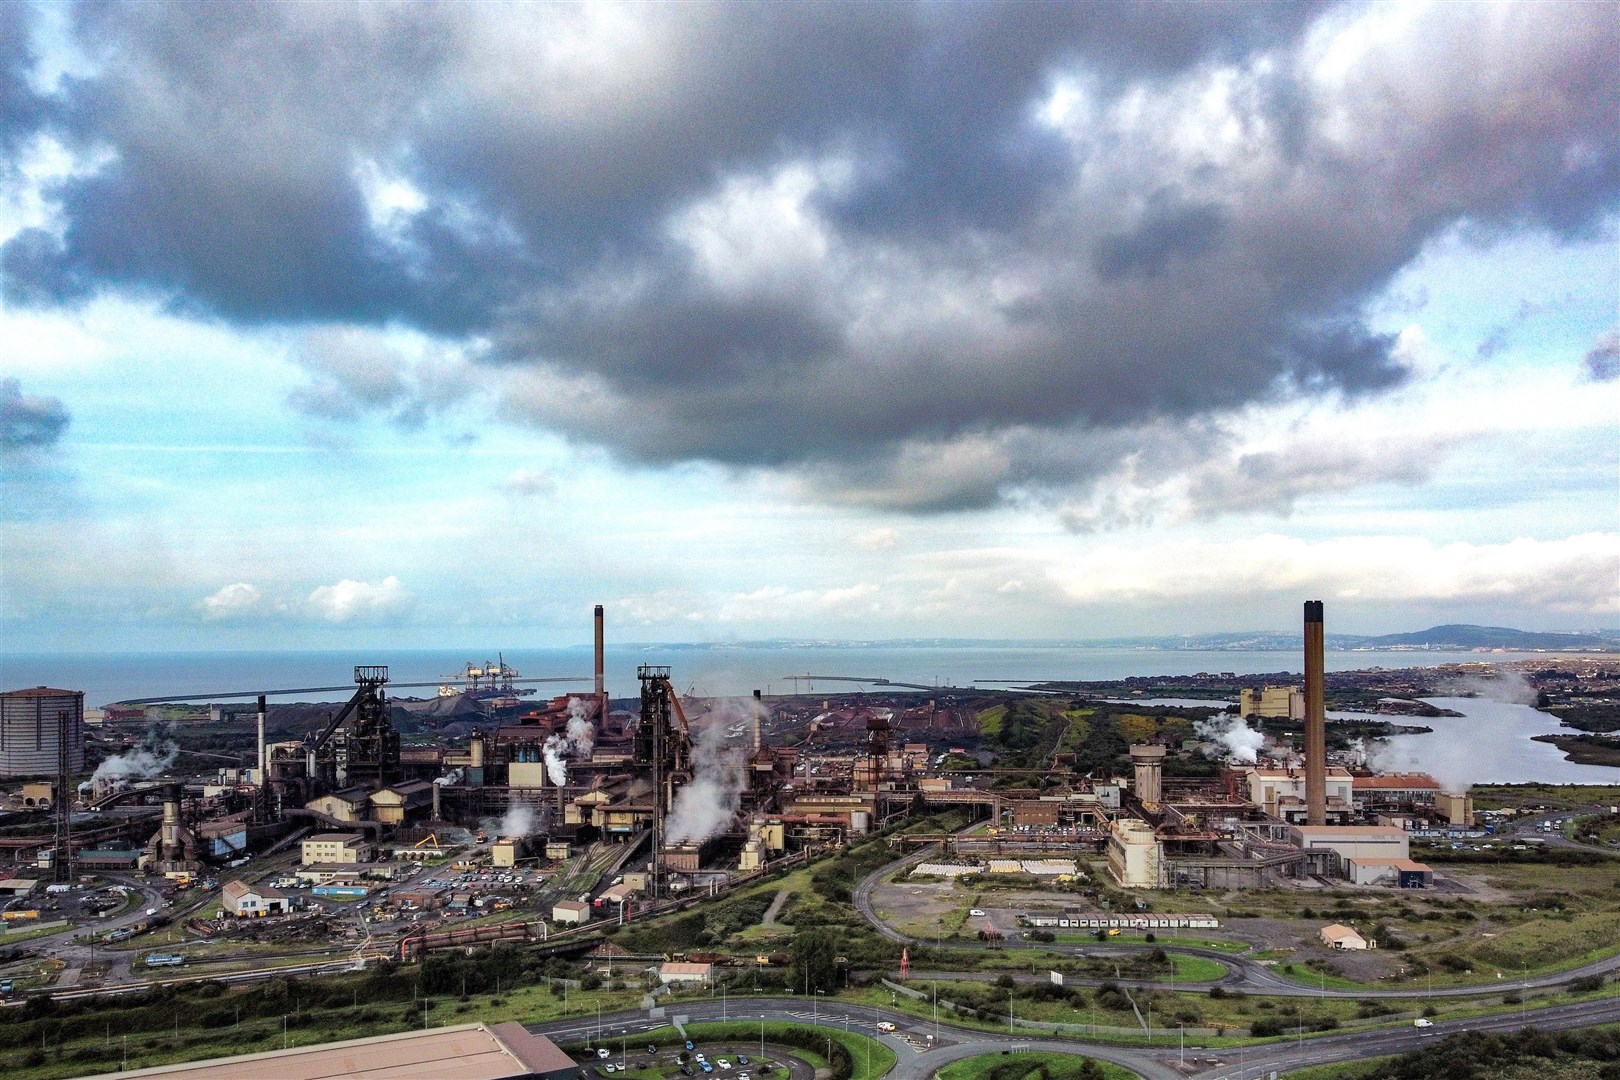 Thousands of jobs are expected to be cut at the Port Talbot plant under plans to produce steel in a greener way (Ben Birchall/PA)